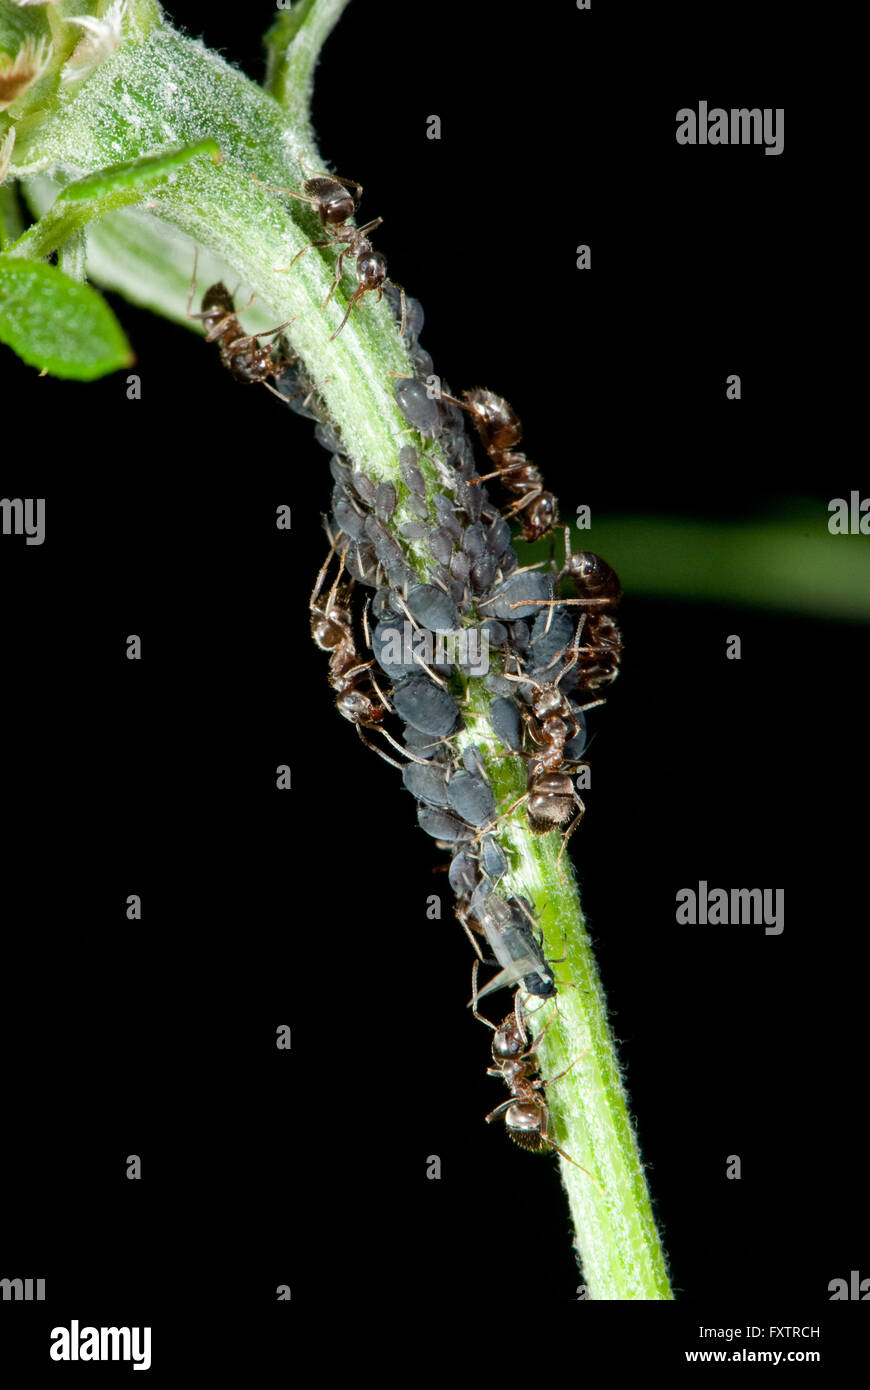 Ants milking plant lice on a knapweed Stock Photo